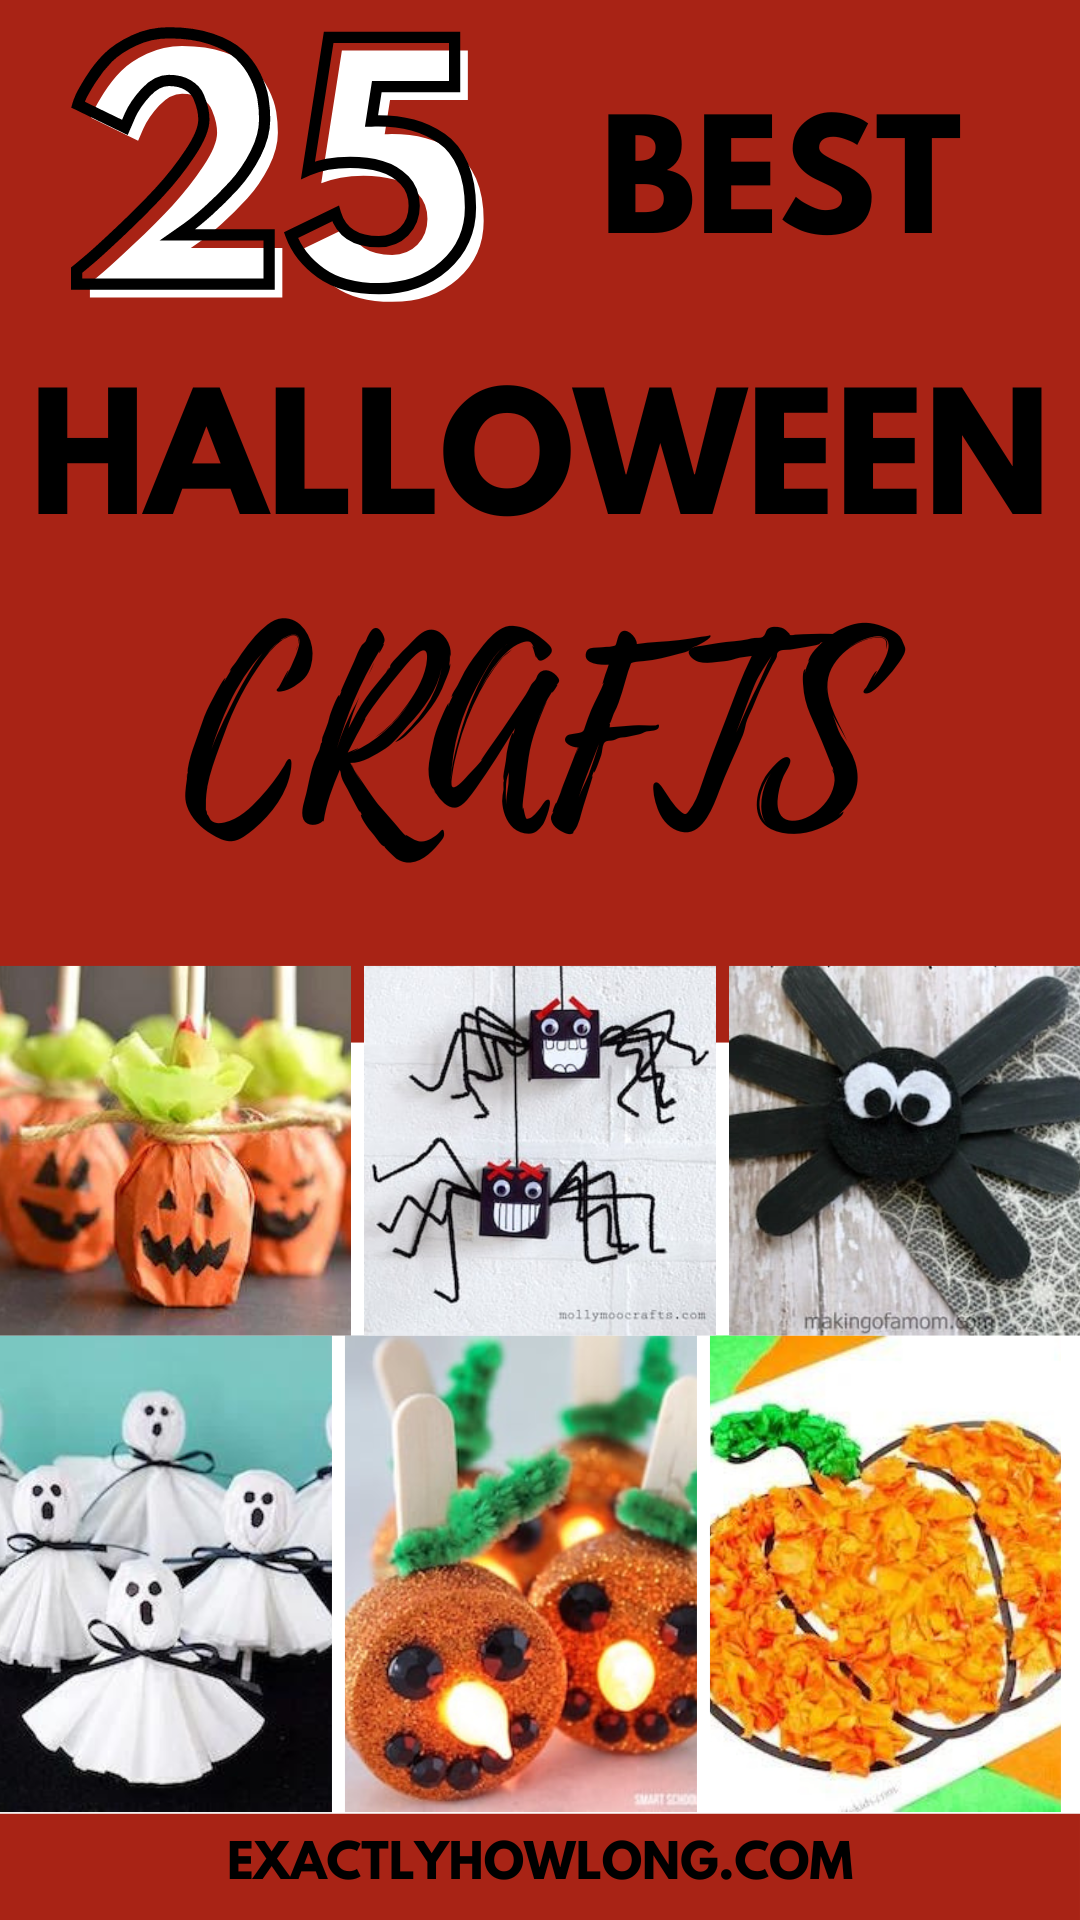 DIY Halloween crafts suitable for selling at Dollar Tree